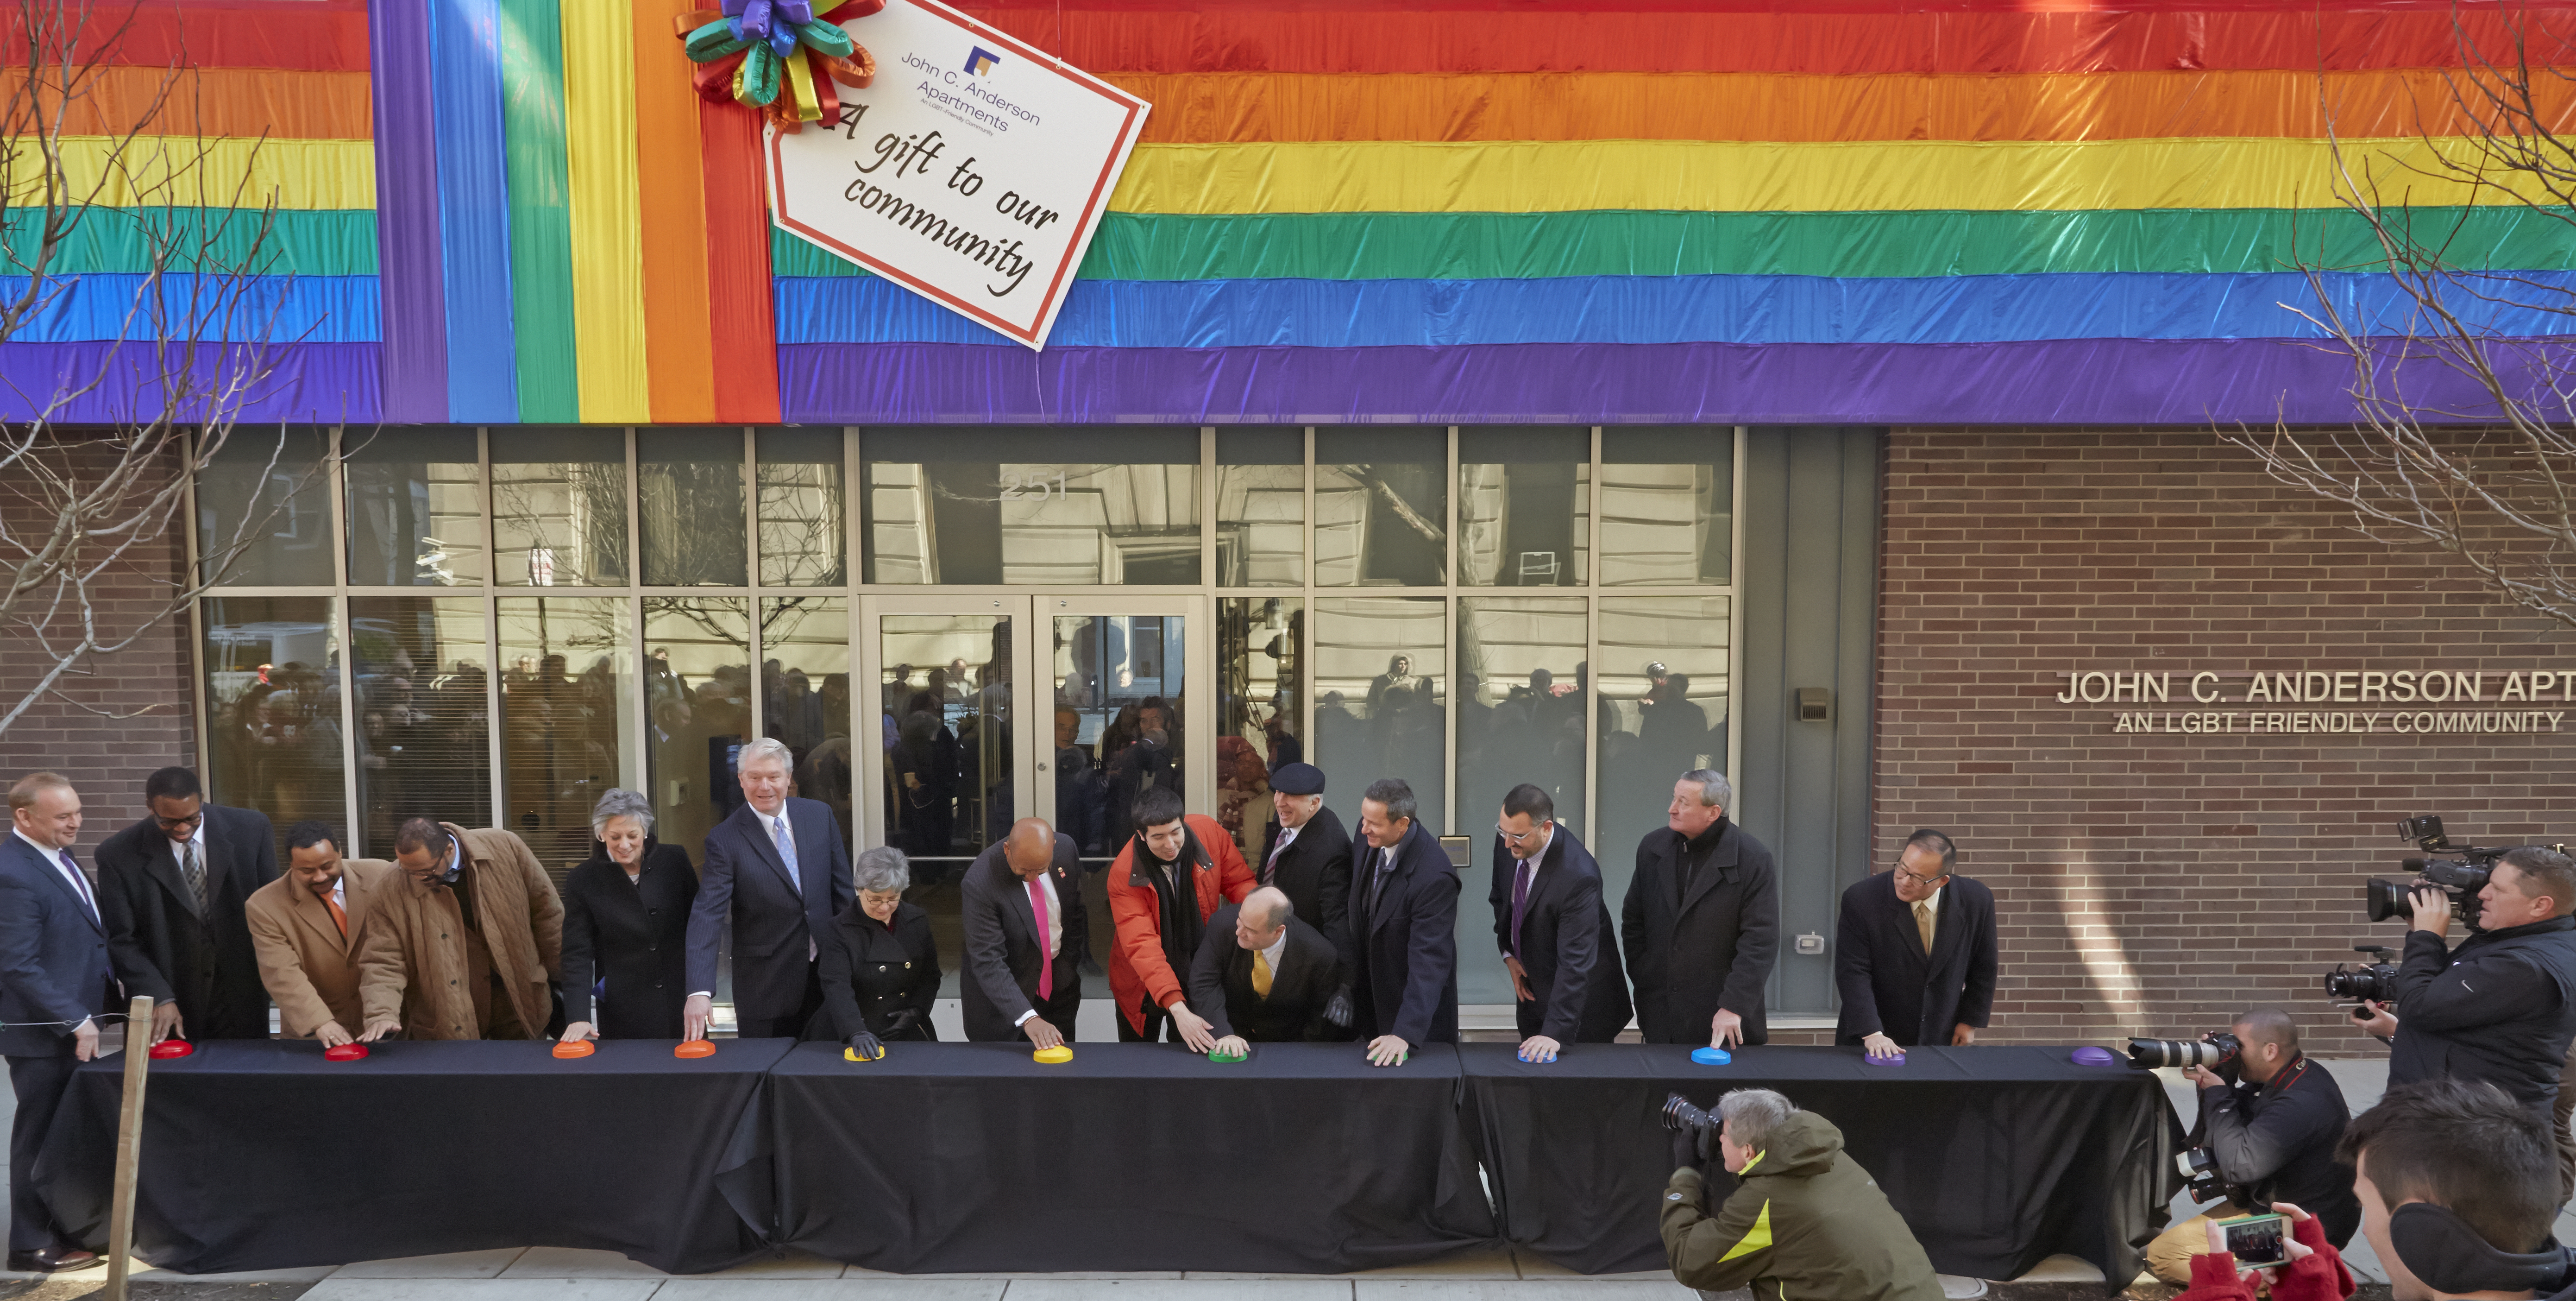 John C. Anderson LGBT-Friendly Affordable Housing is A “Dream Come True”